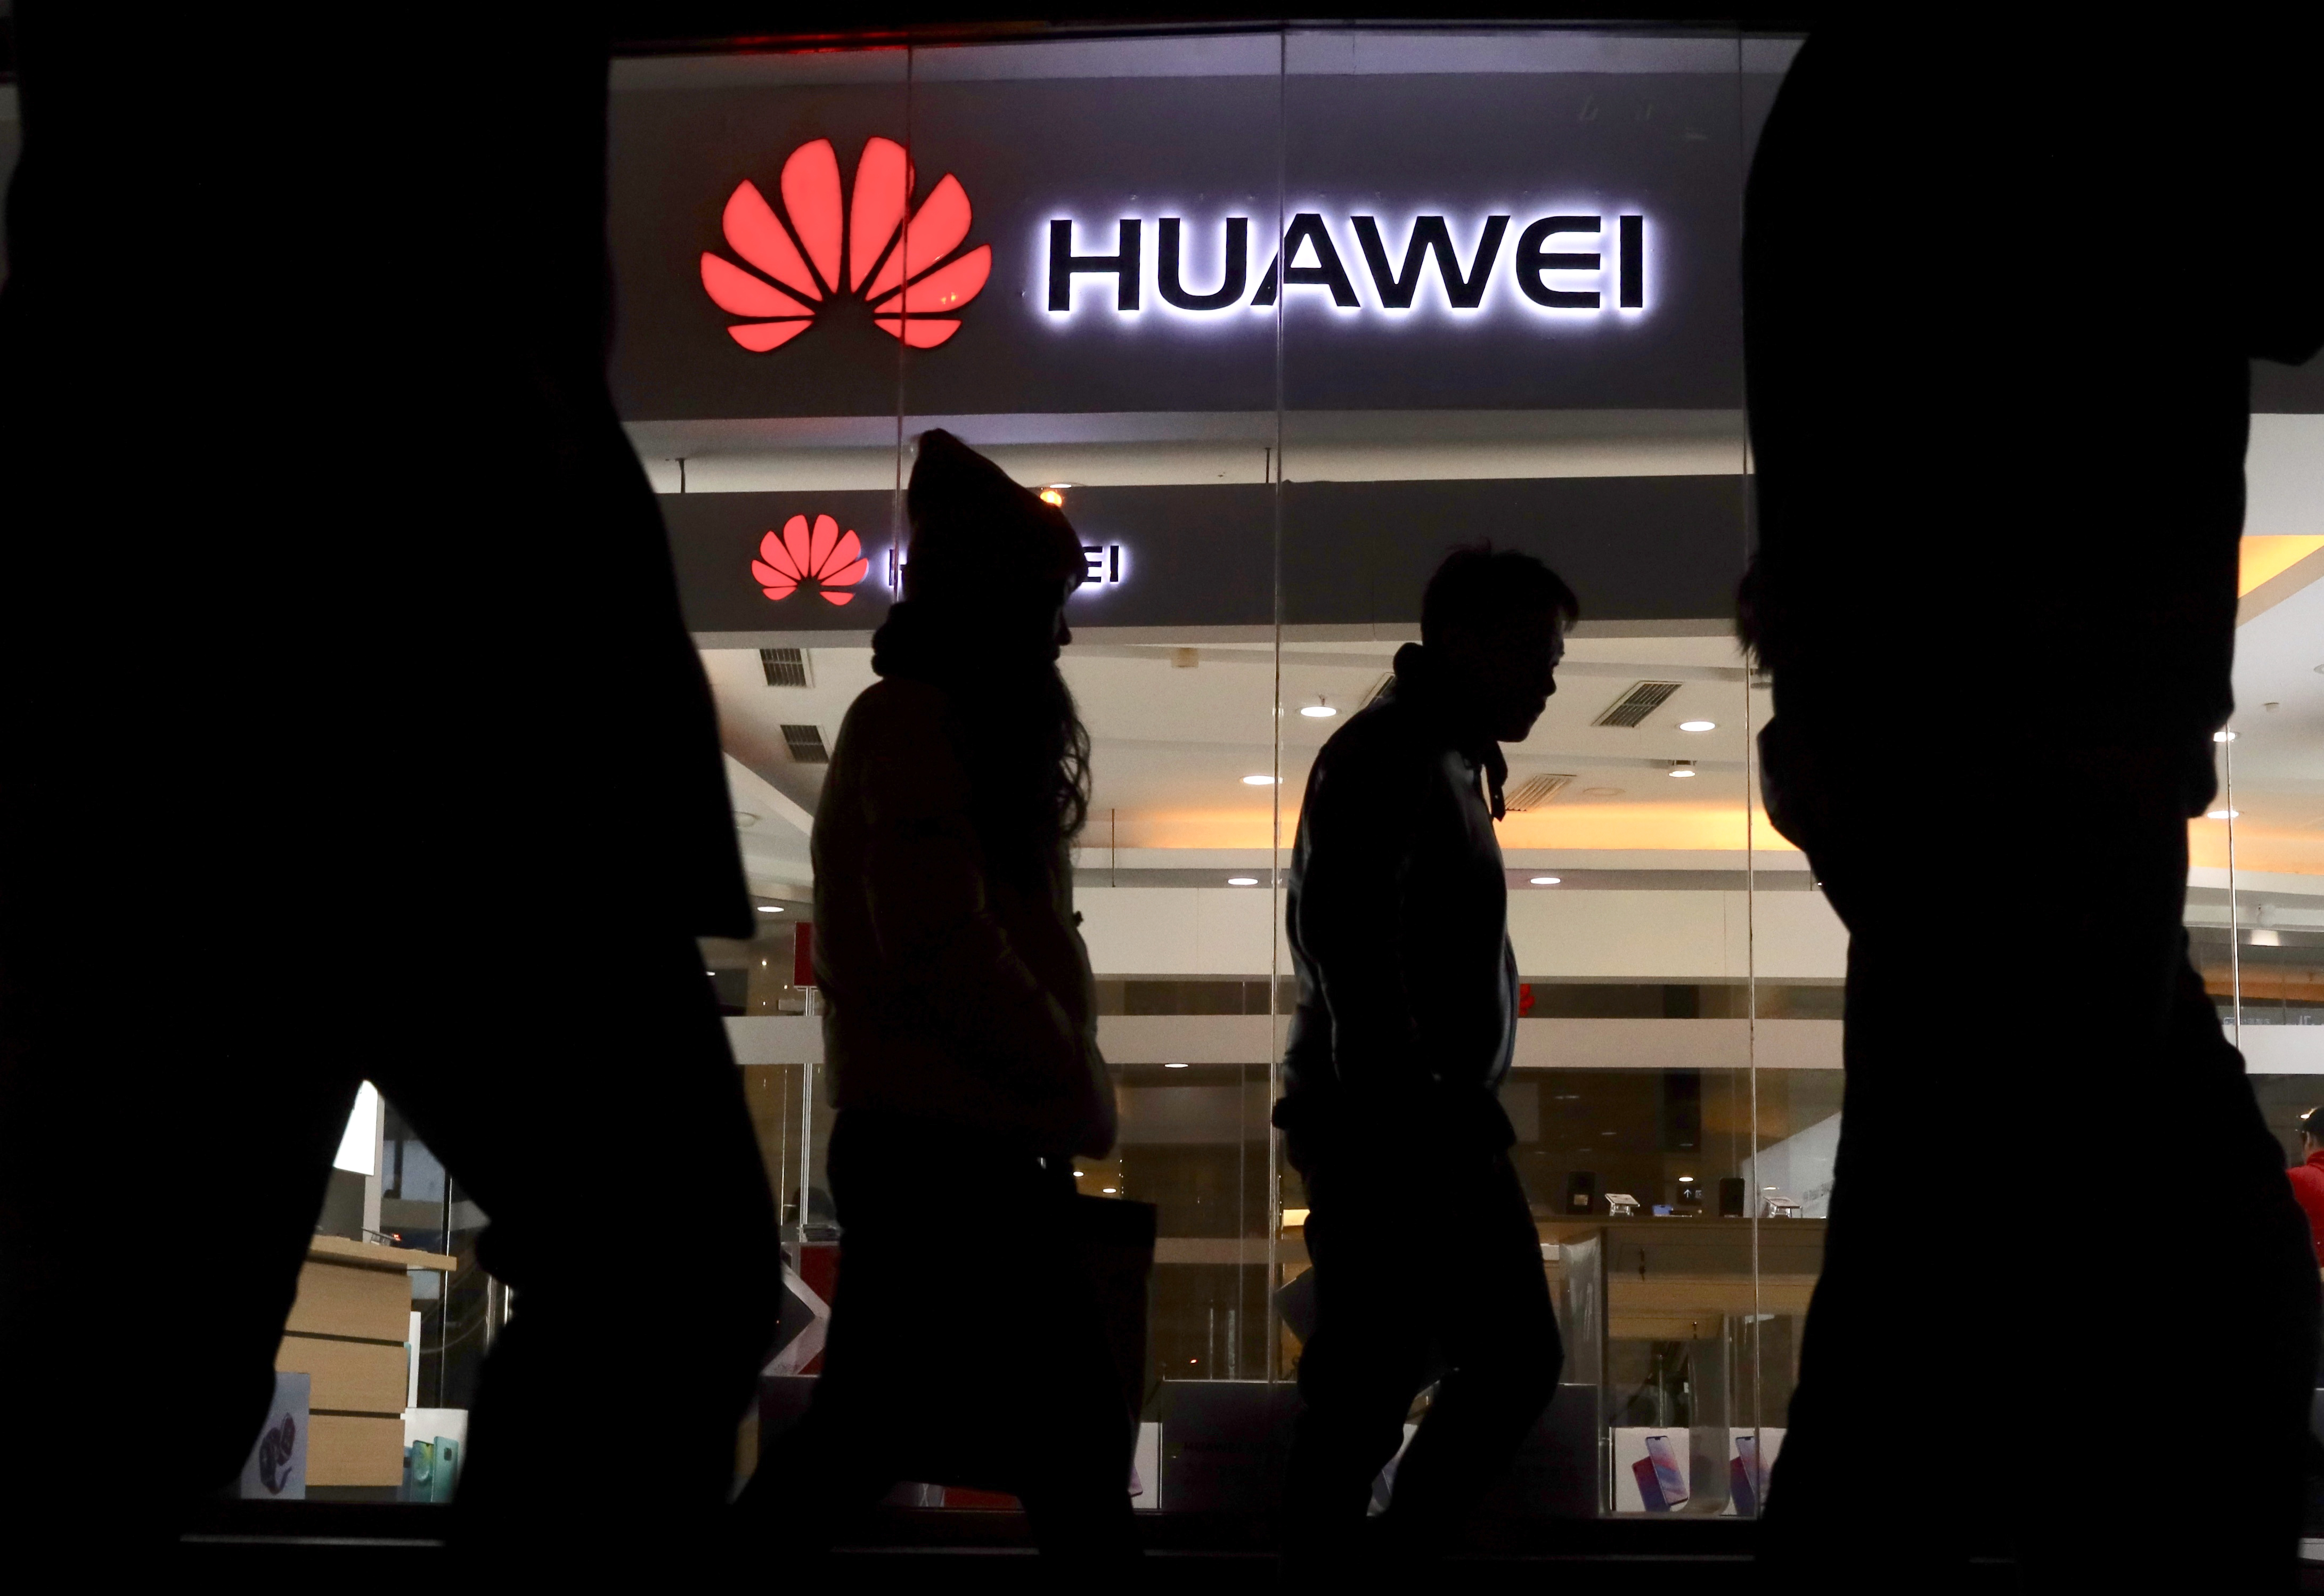 jammer nets jersey weather , Executive’s Arrest, Security Worries Stymie Huawei’s Reach